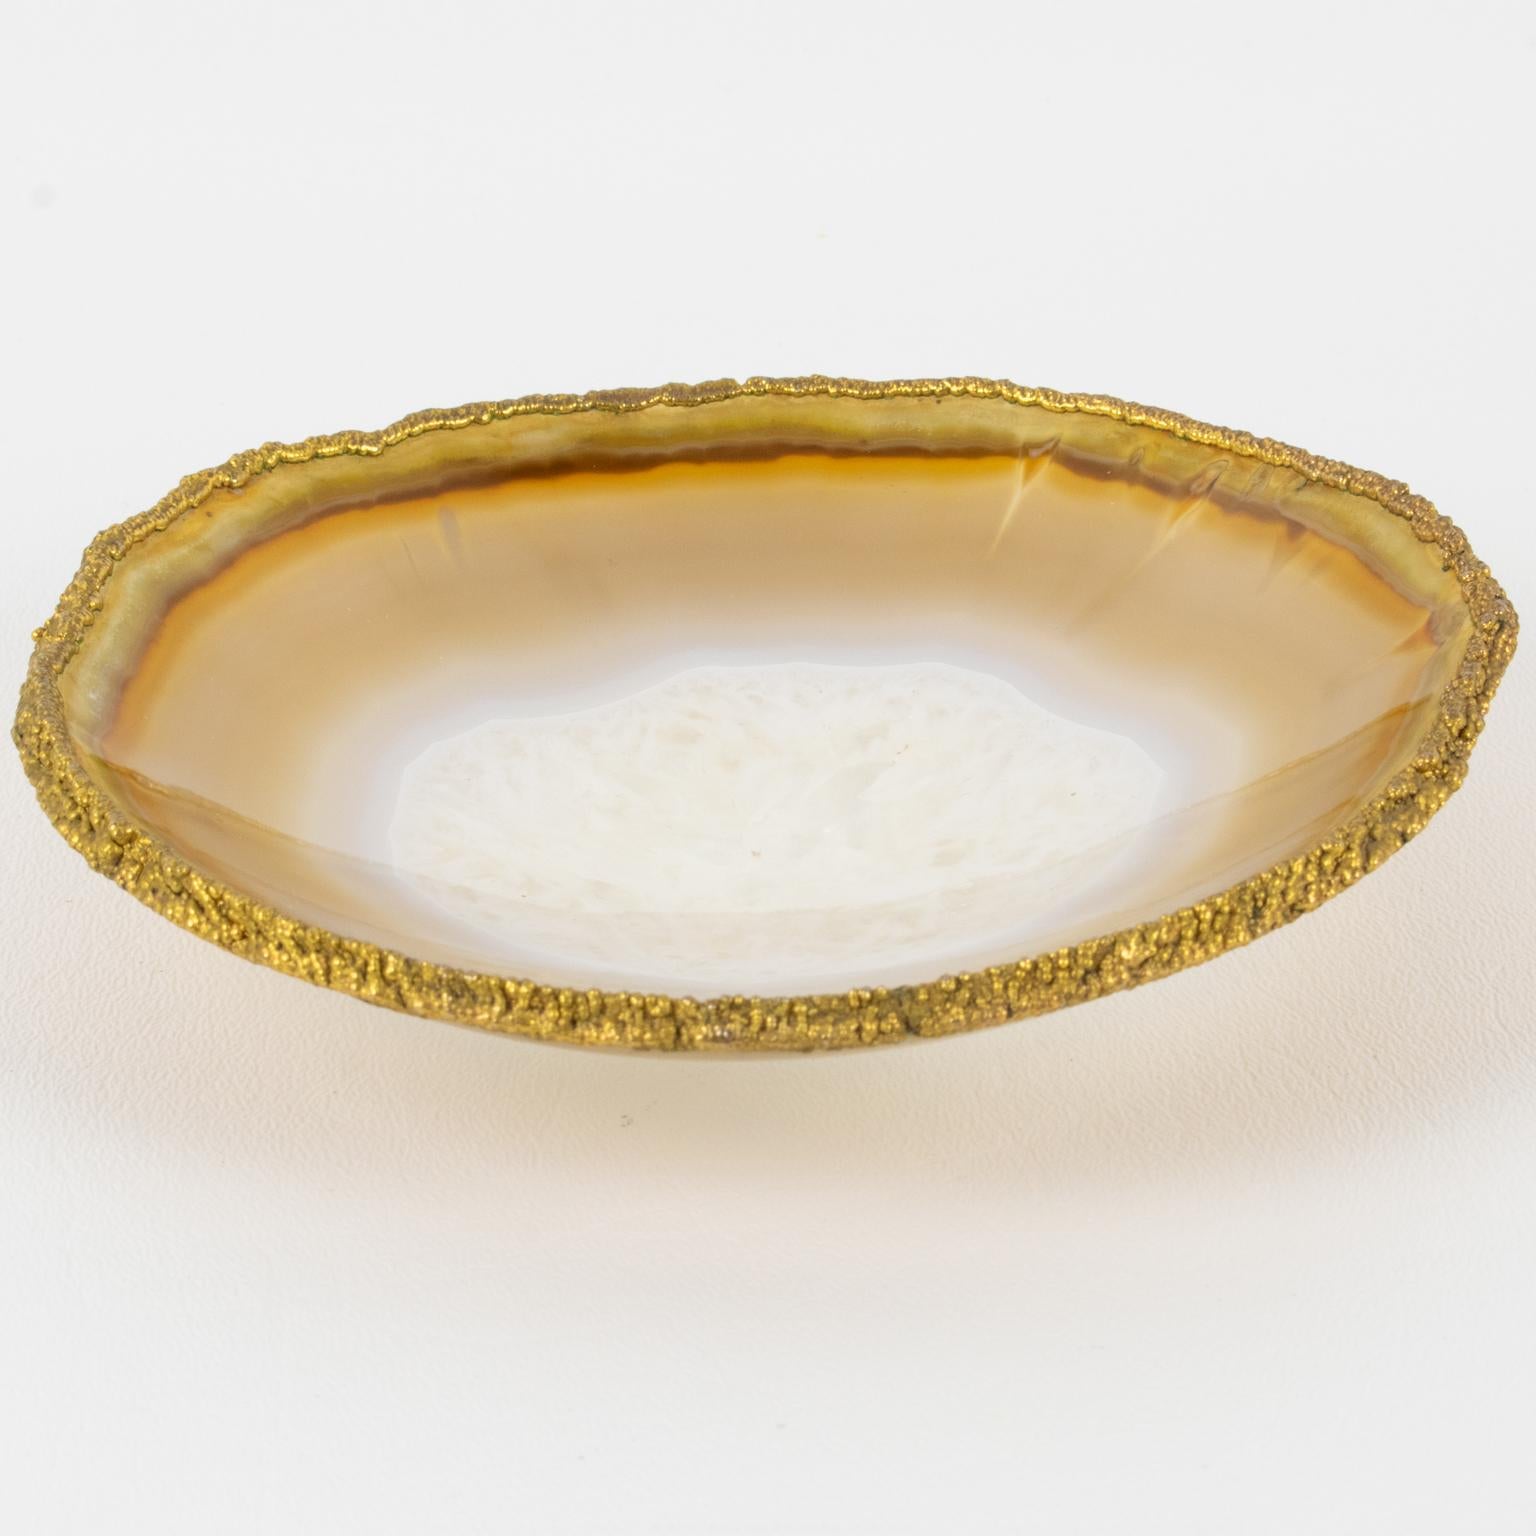 This elegant natural agate stone modernist desk tidy, or vide poche, is reminiscent of Willy Daro's work. The catchall features a natural agate stone rounded raised bowl with a gilded bronze trim and color swirlings. There is no visible maker's